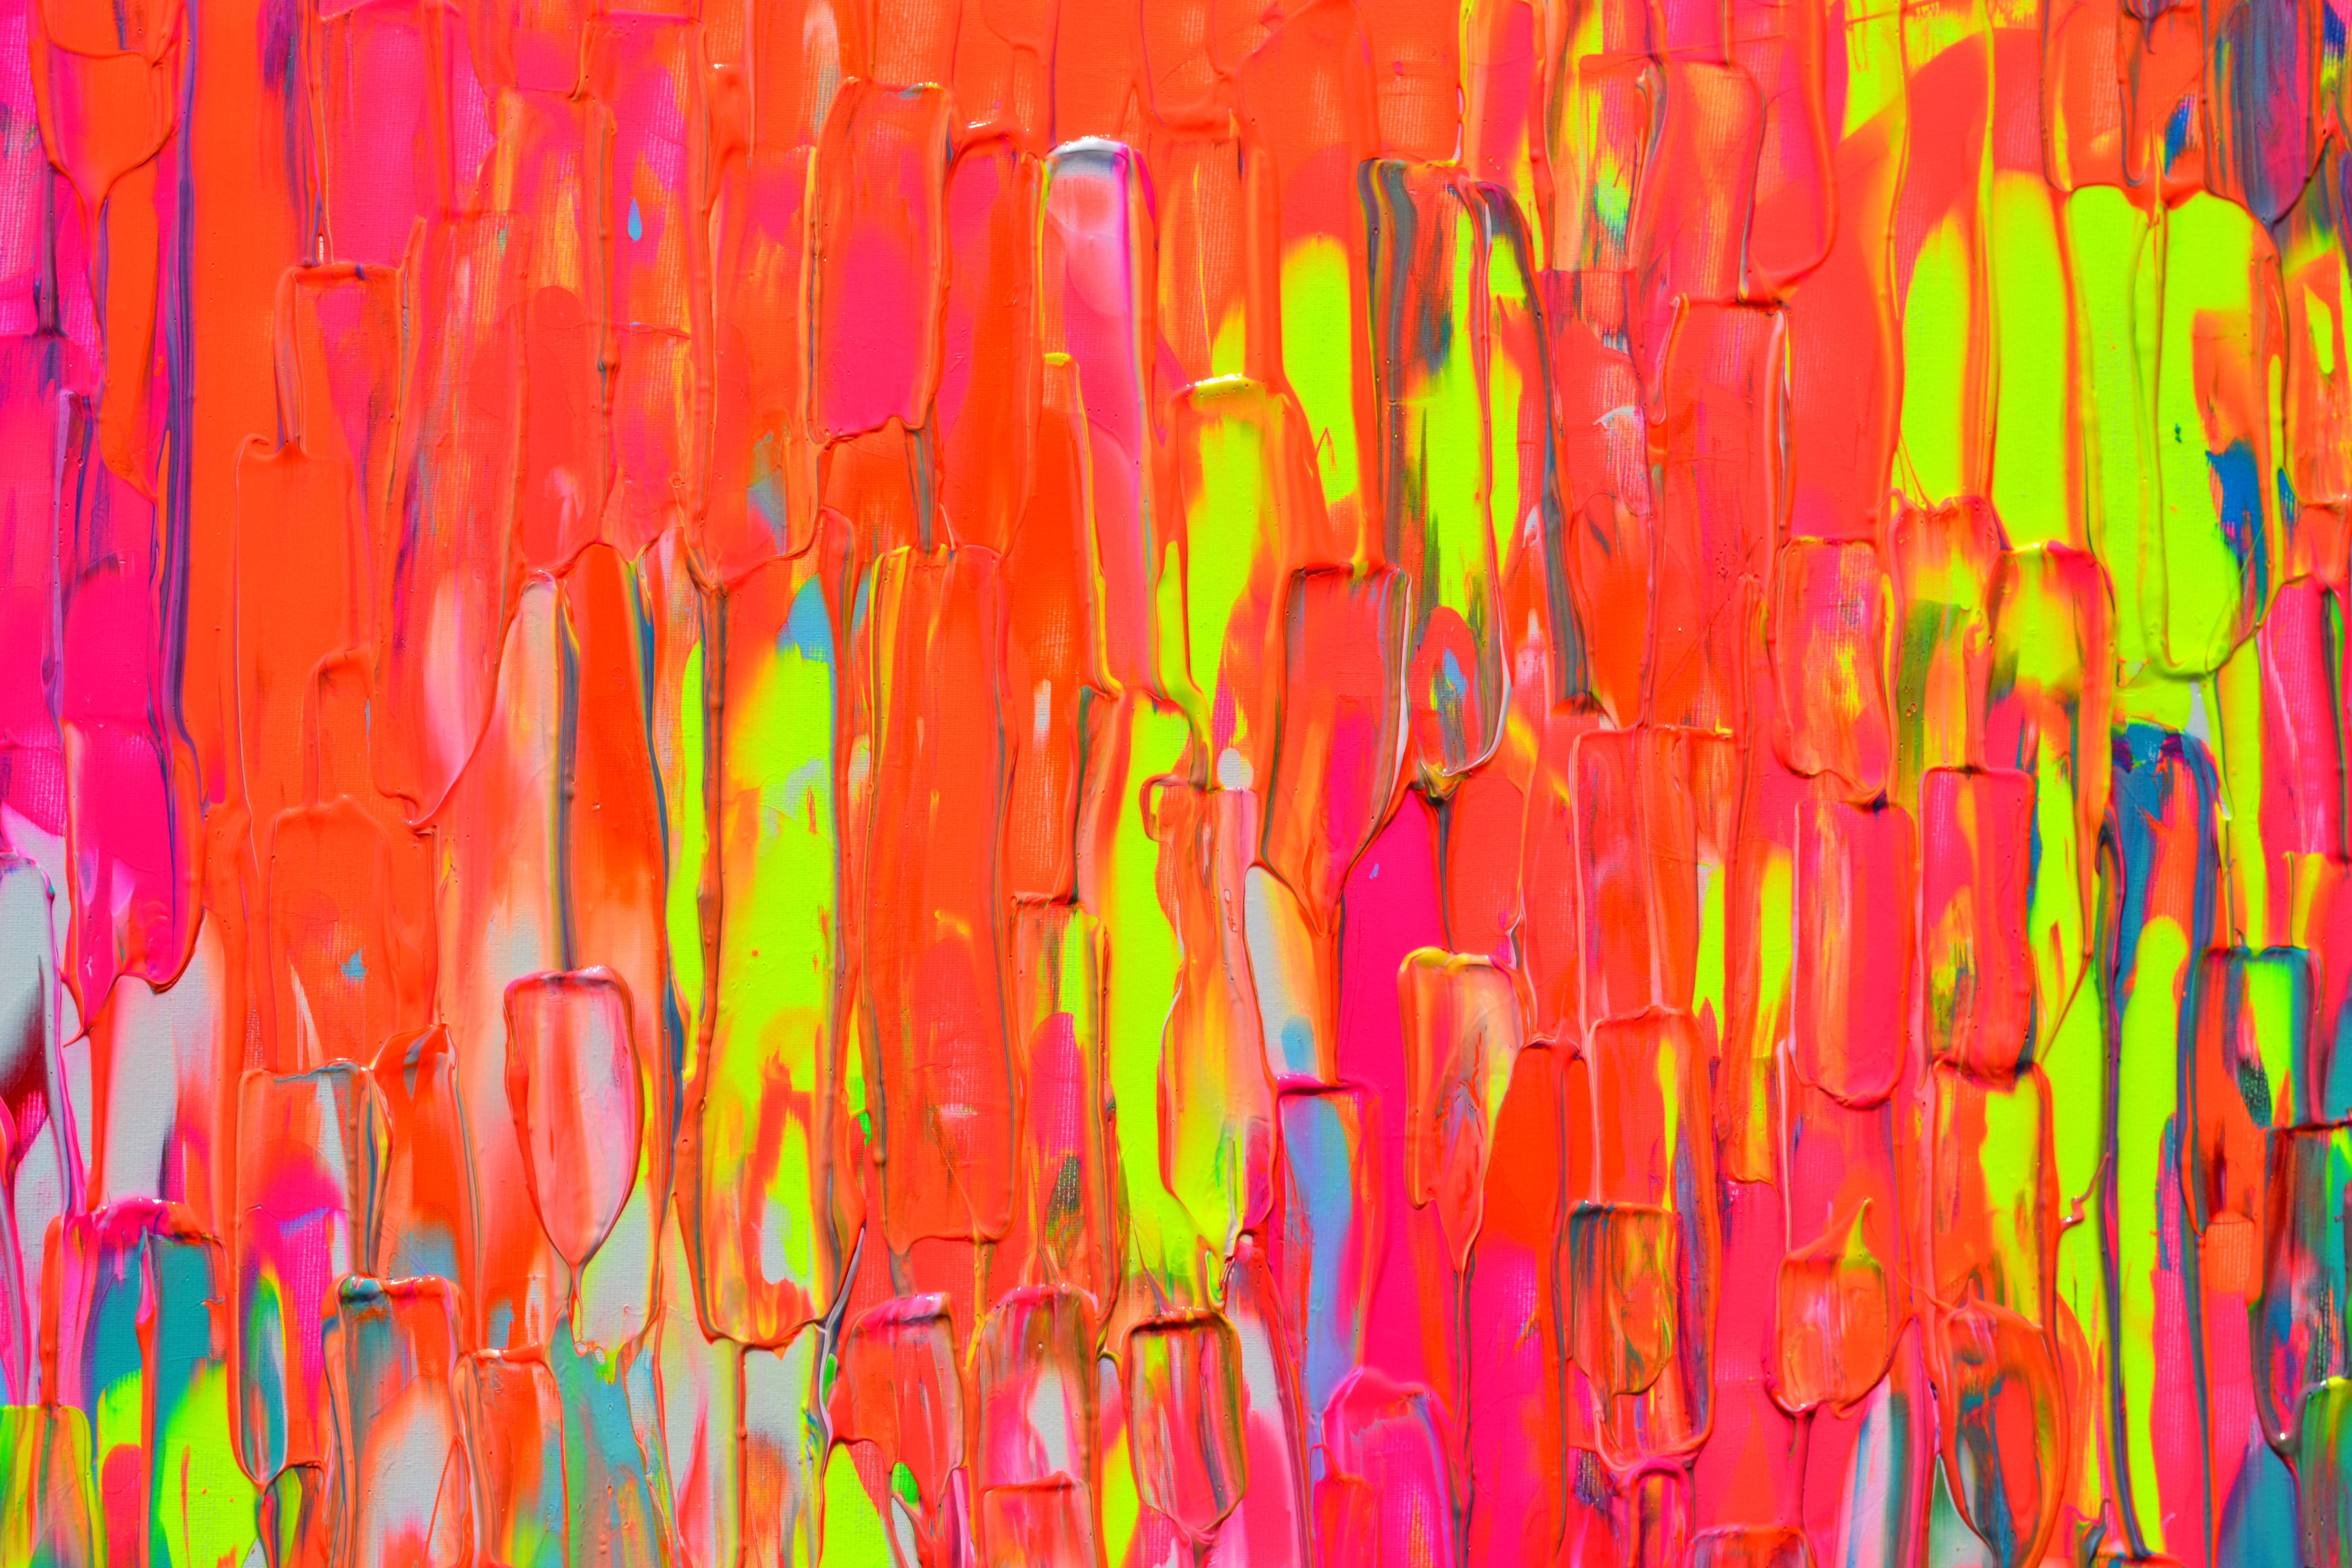 A very beautiful large colorful abstract painting with many neon nuances, havy textured, vibrant and emotional.
READY TO HANG - GALLERY QUALITY
It's all about colors happiness and freedom!
Dimensions: 140x80X4 cm - 55.12x31.5x1.6 inches.
Some neon